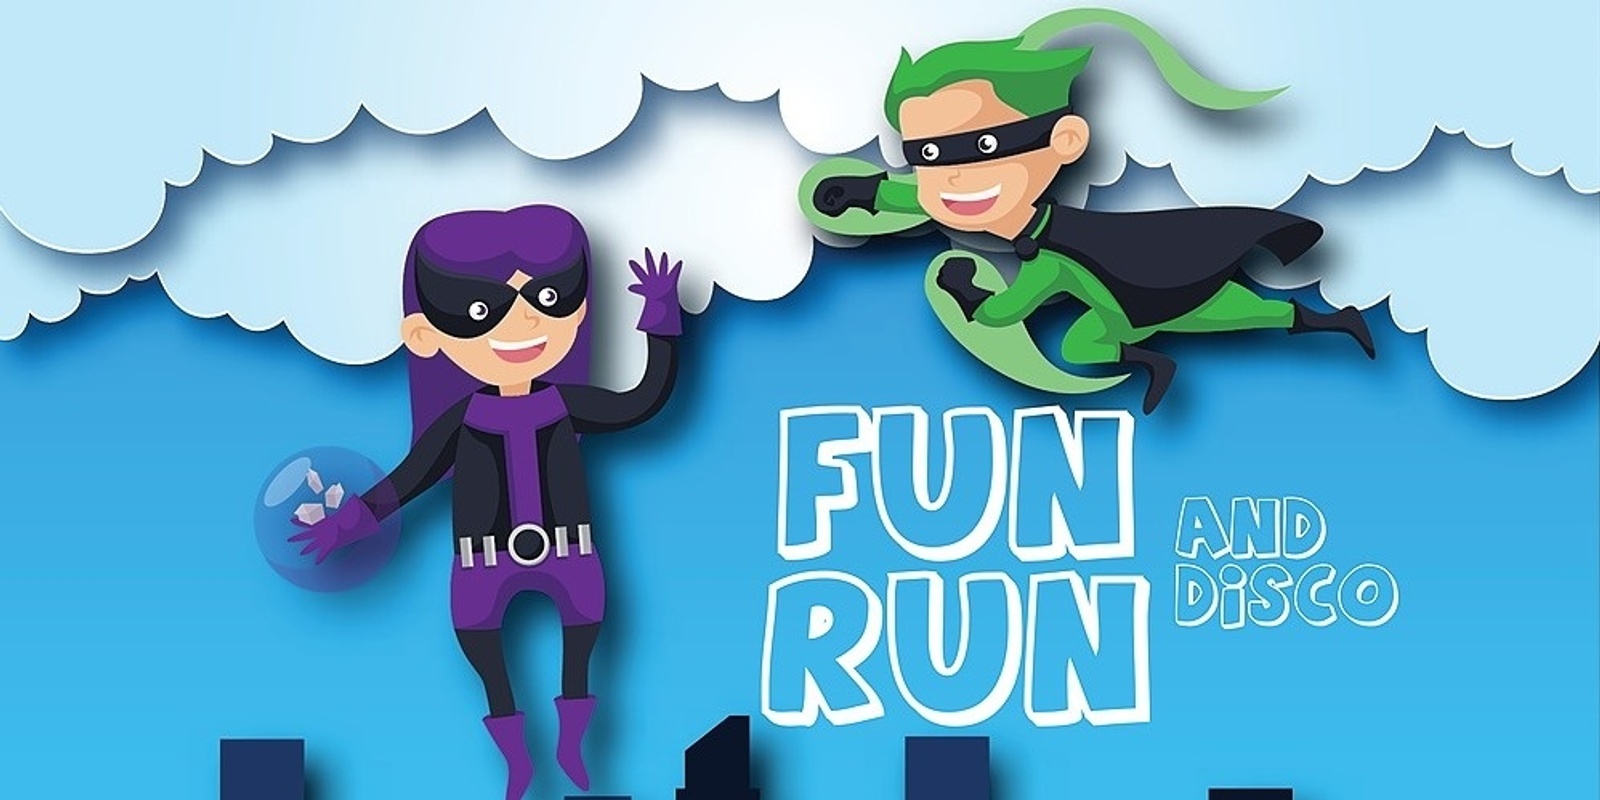 Banner image for Clayfield College P&F Fun Run